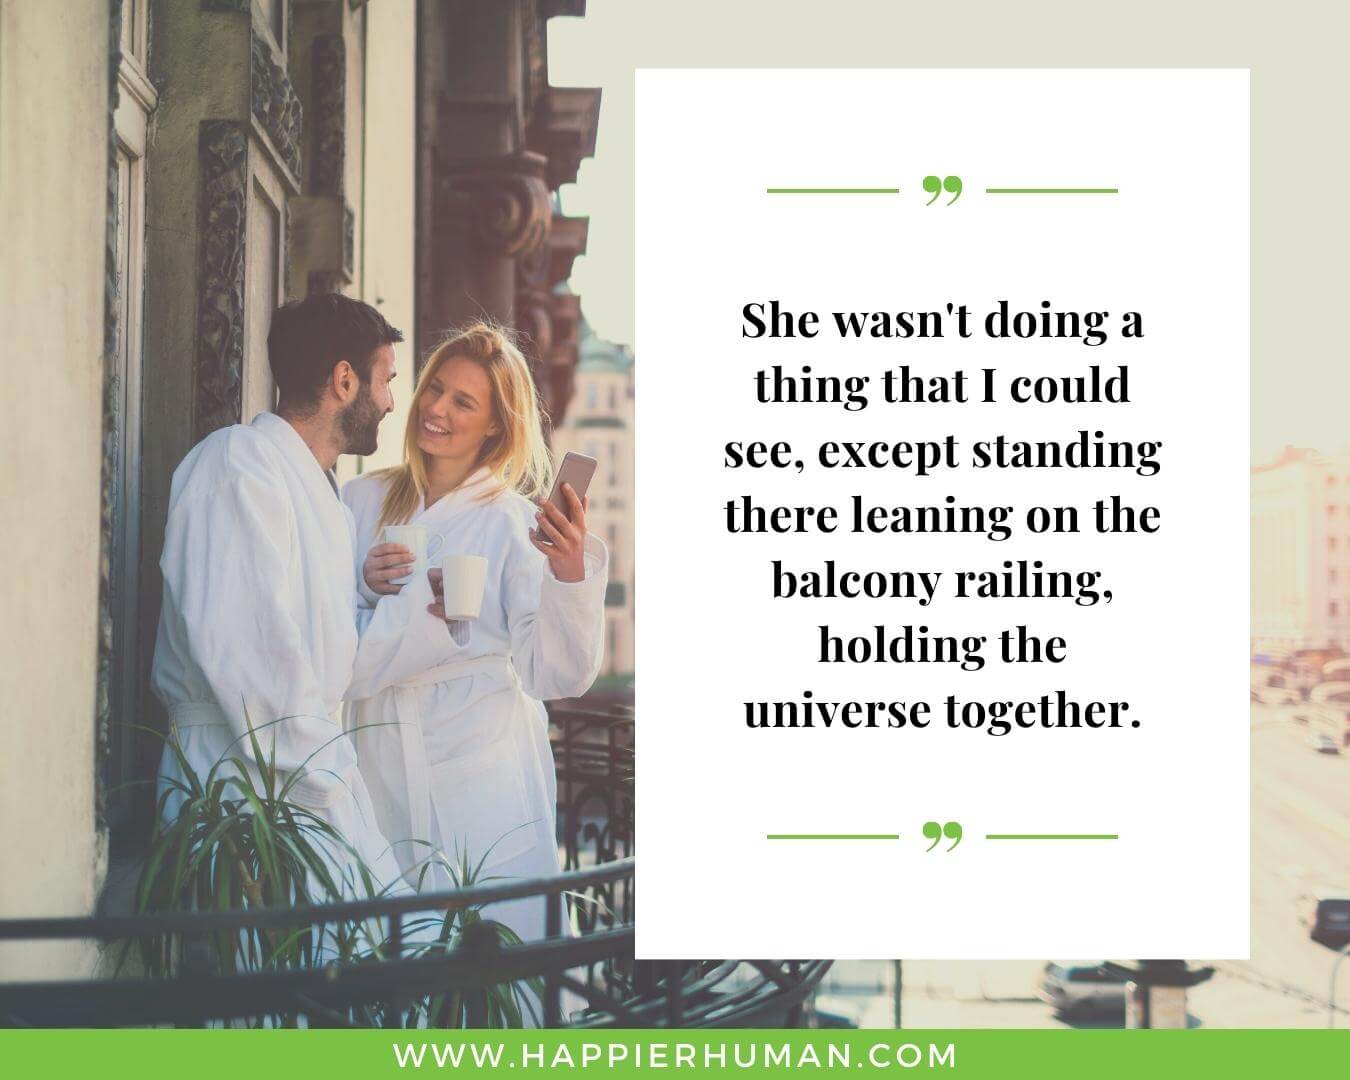 Unconditional Love Quotes for Her - “She wasn't doing a thing that I could see, except standing there leaning on the balcony railing, holding the universe together.”